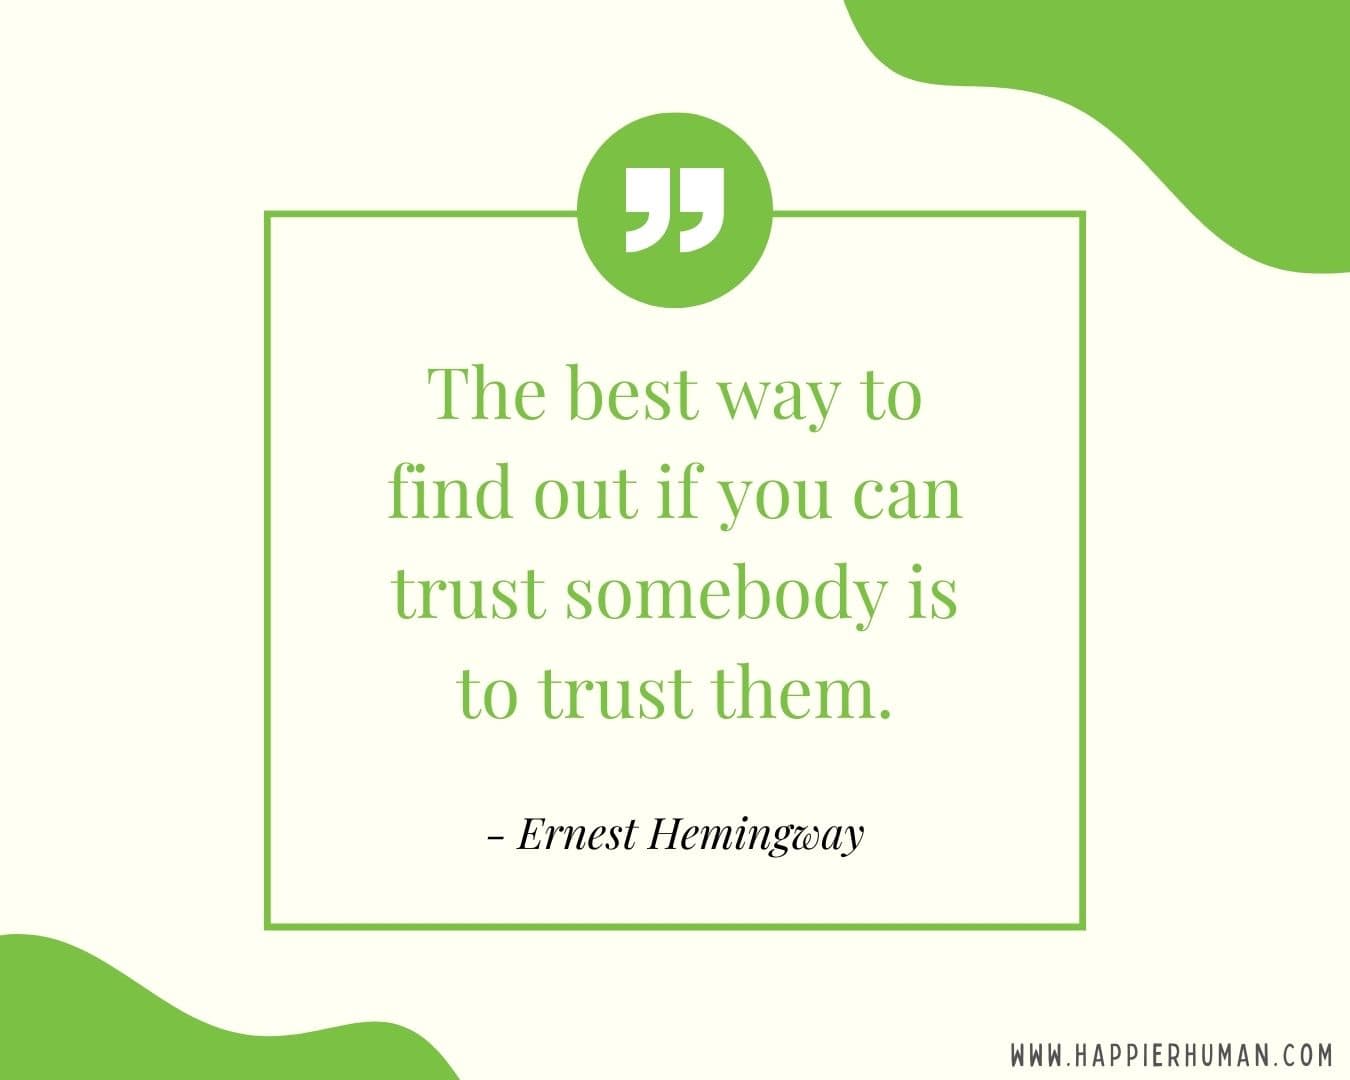 Broken Trust Quotes - “The best way to find out if you can trust somebody is to trust them.” - Ernest Hemingway